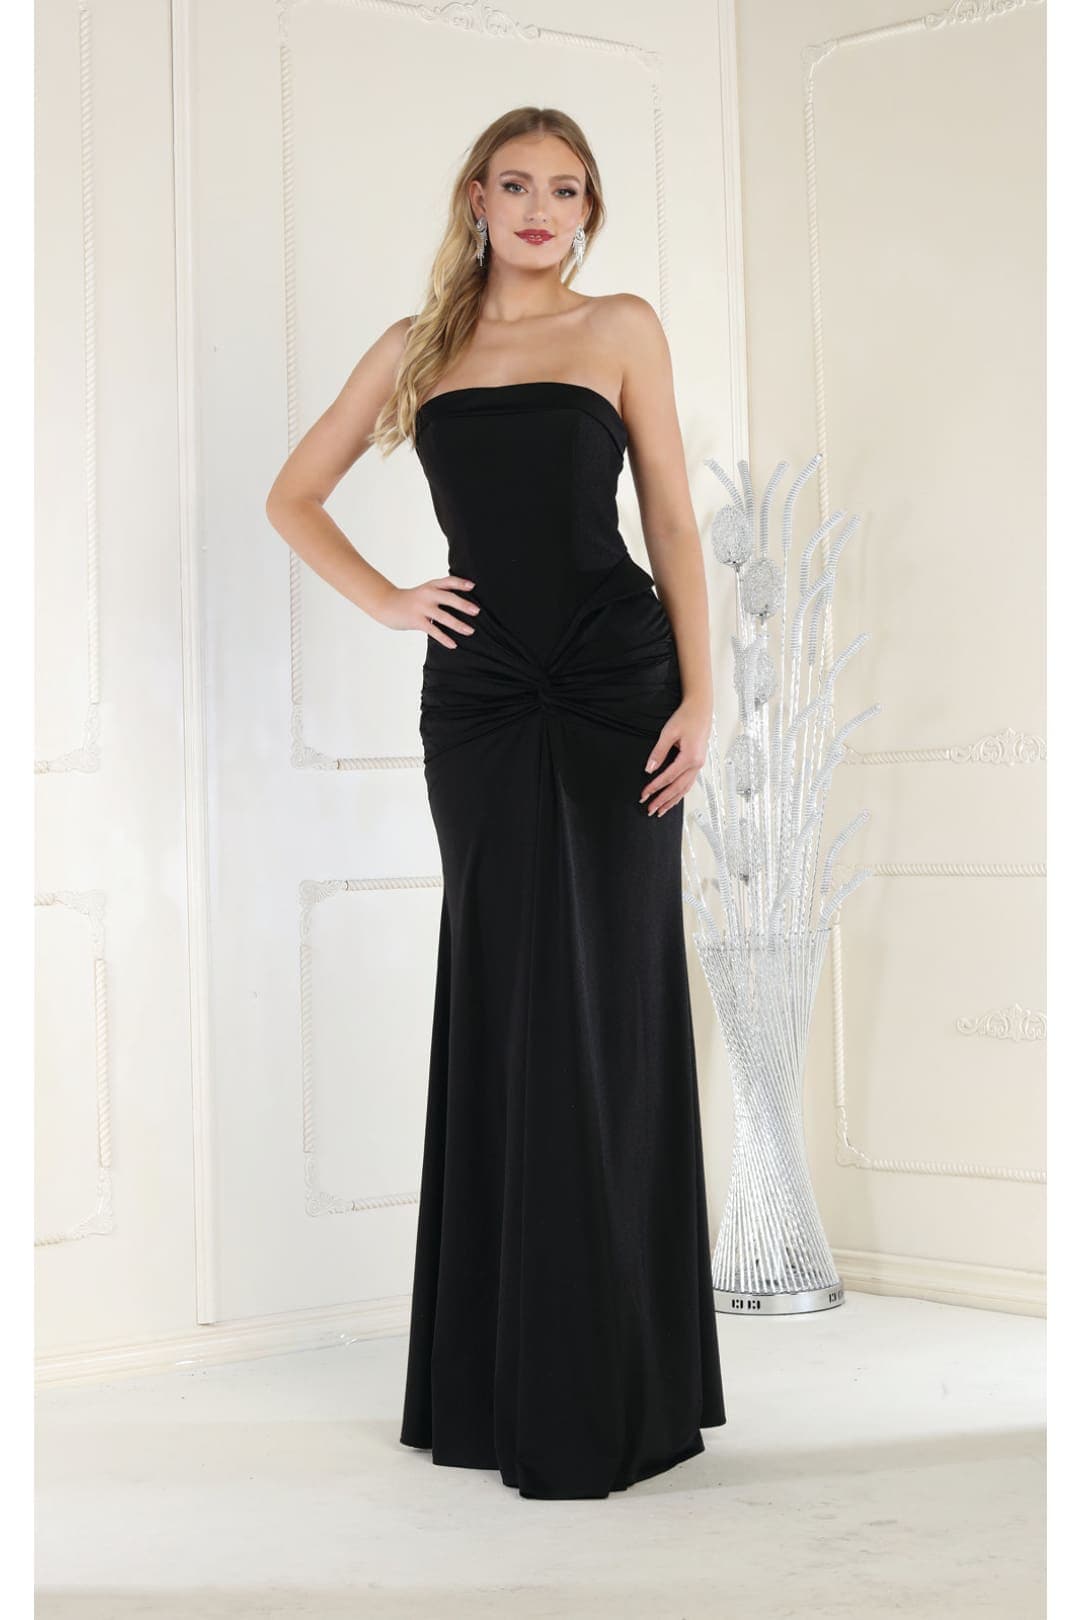 May Queen MQ1947 Simple Strapless Stretchy Dress - BLACK / 4 - Dress